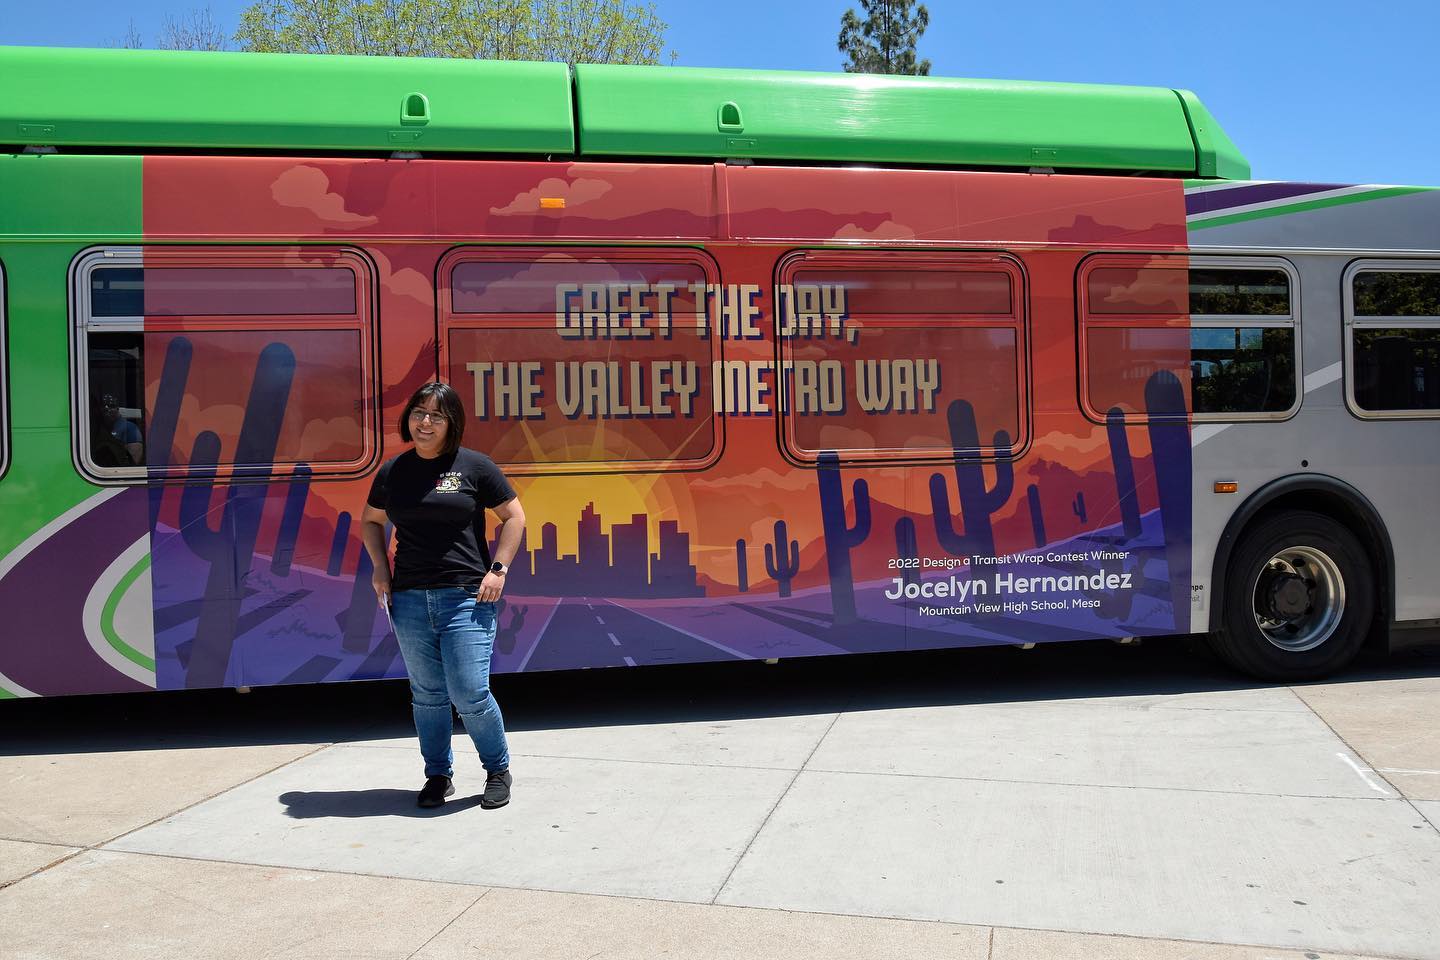 A big CONGRATULATIONS to Mountain View High School senior, Jocelyn Hernandez! She is the winner of Valley Metro’s 22nd Annual Design a Transit Wrap contest. Her artwork, titled Greet the Day the Valley Metro Way, will be featured on a bus and light rail train for one year!